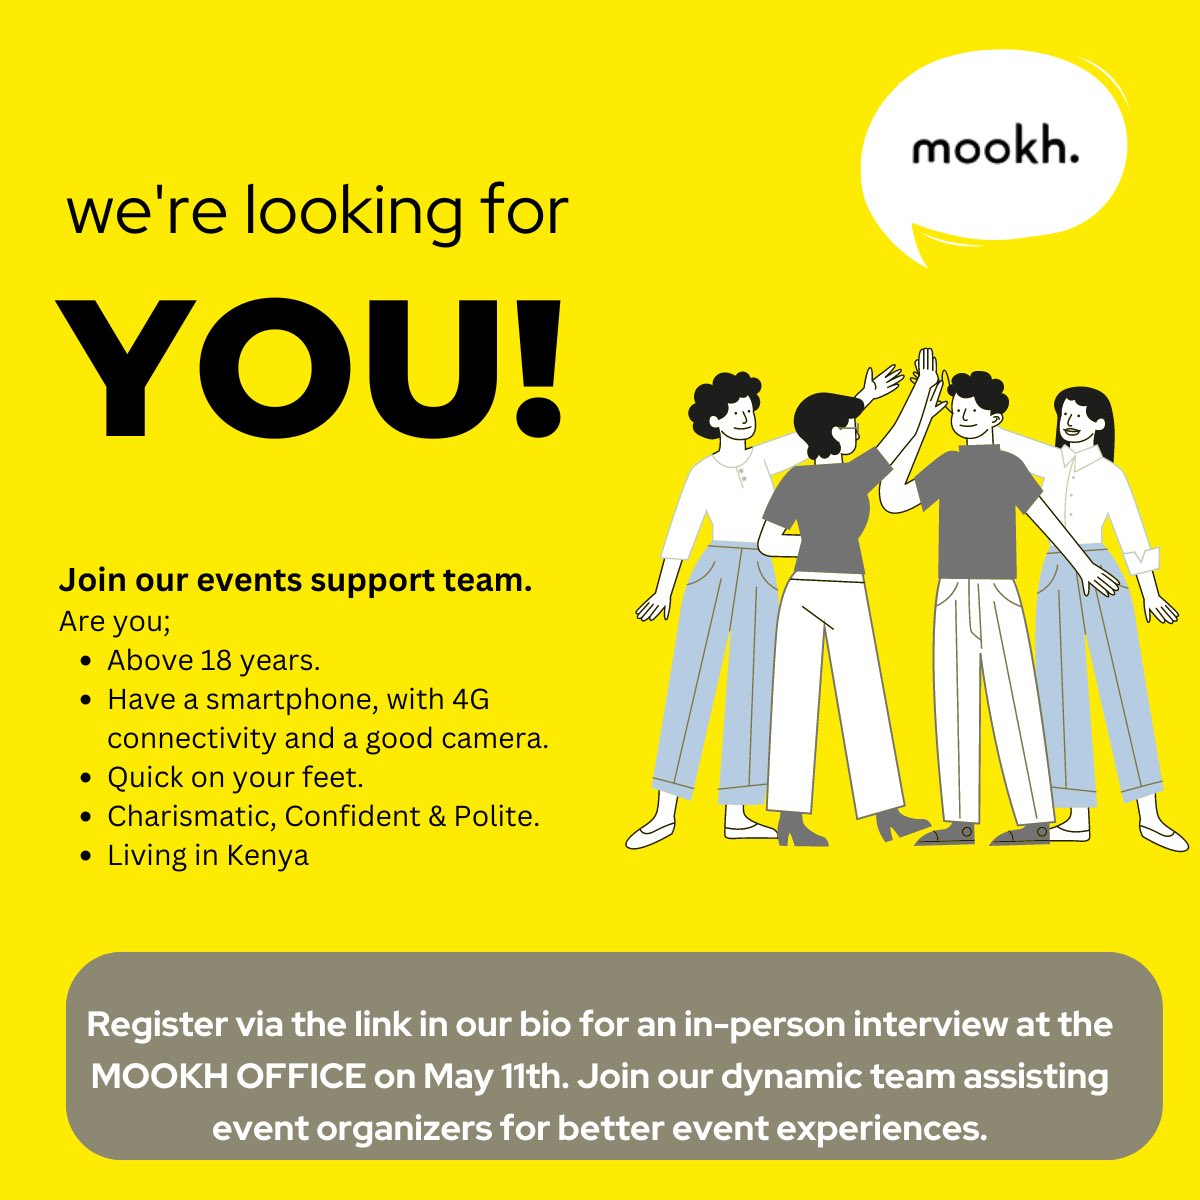 🌟 Join our dynamic team! 🌟 Are you over 18, tech-savvy, quick-thinking, and charming? If so, we want YOU! Register for an in-person interview on Saturday 11th May for a chance to be part of a great team supporting Kenyan event organisers. #IkoKaziKe mookh.com/event/mookh-af…